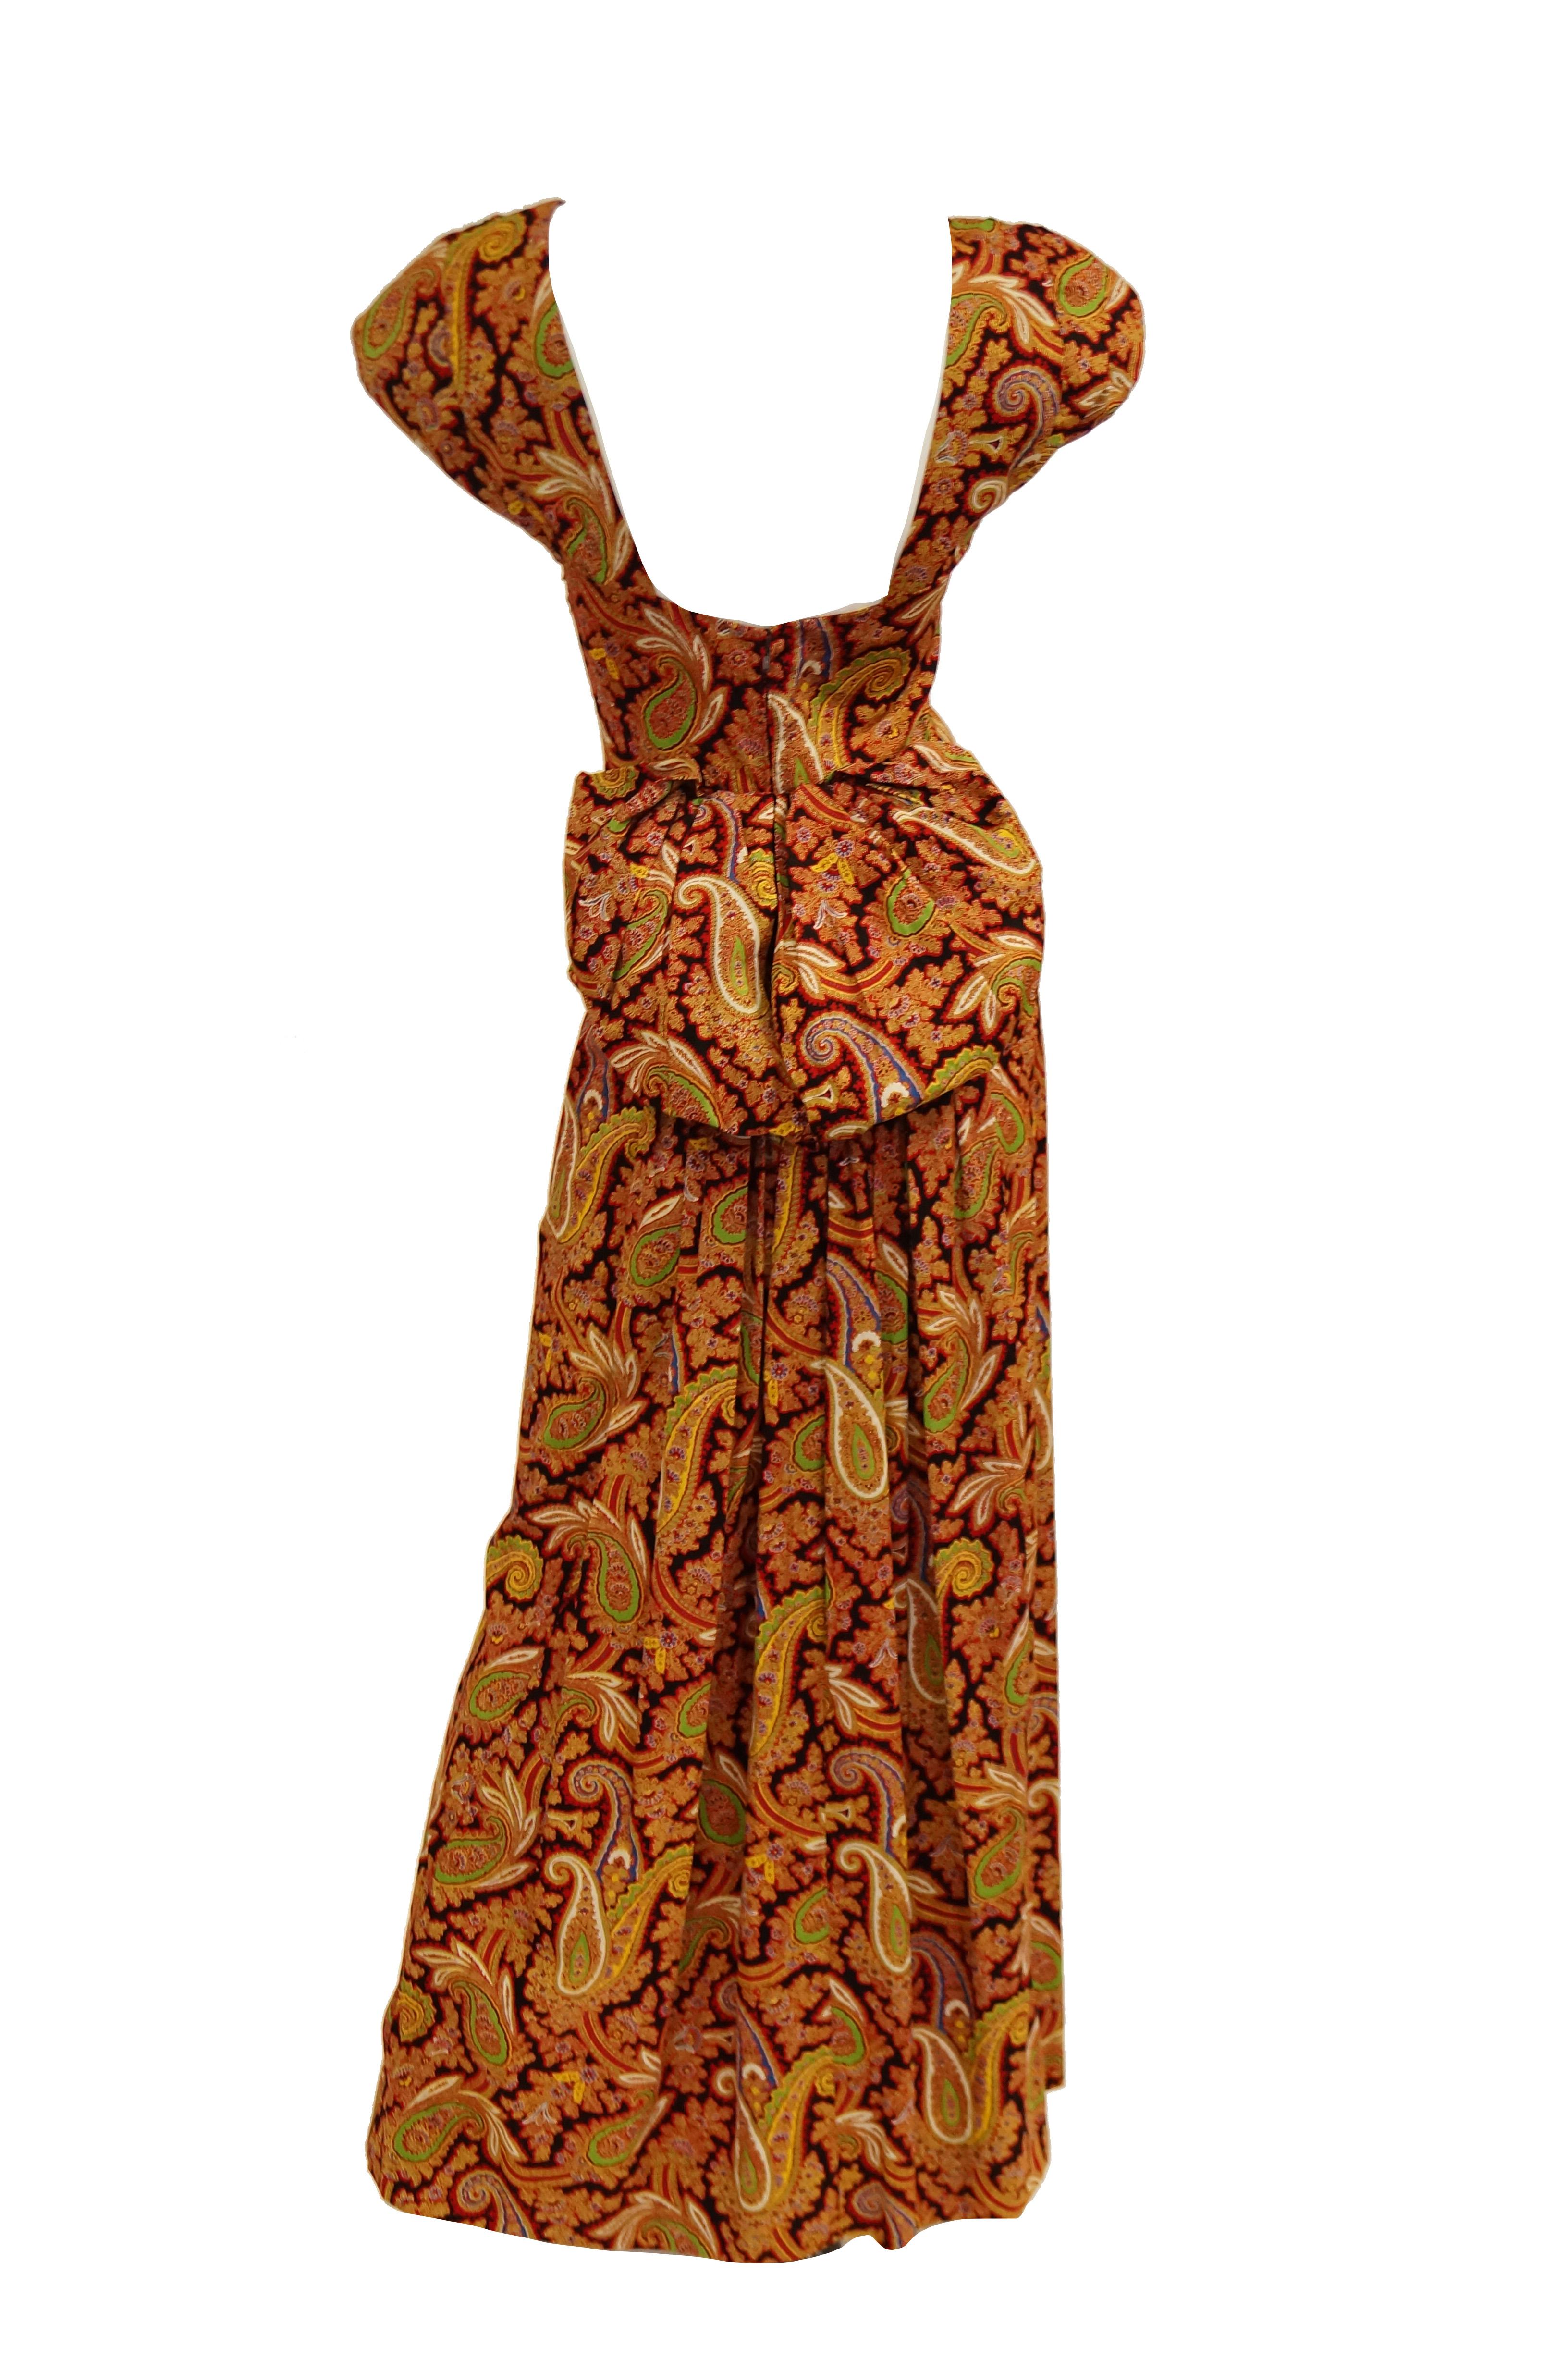 ABSOLUTELY Gorgeous 1940s dress in a lush red and gold paisley floral print! This maxi evening dress features short lightly capped sleeves, a sweetheart neckline with ruched point, a low scoop back, and an amazing bow - like bustle! The skirt is